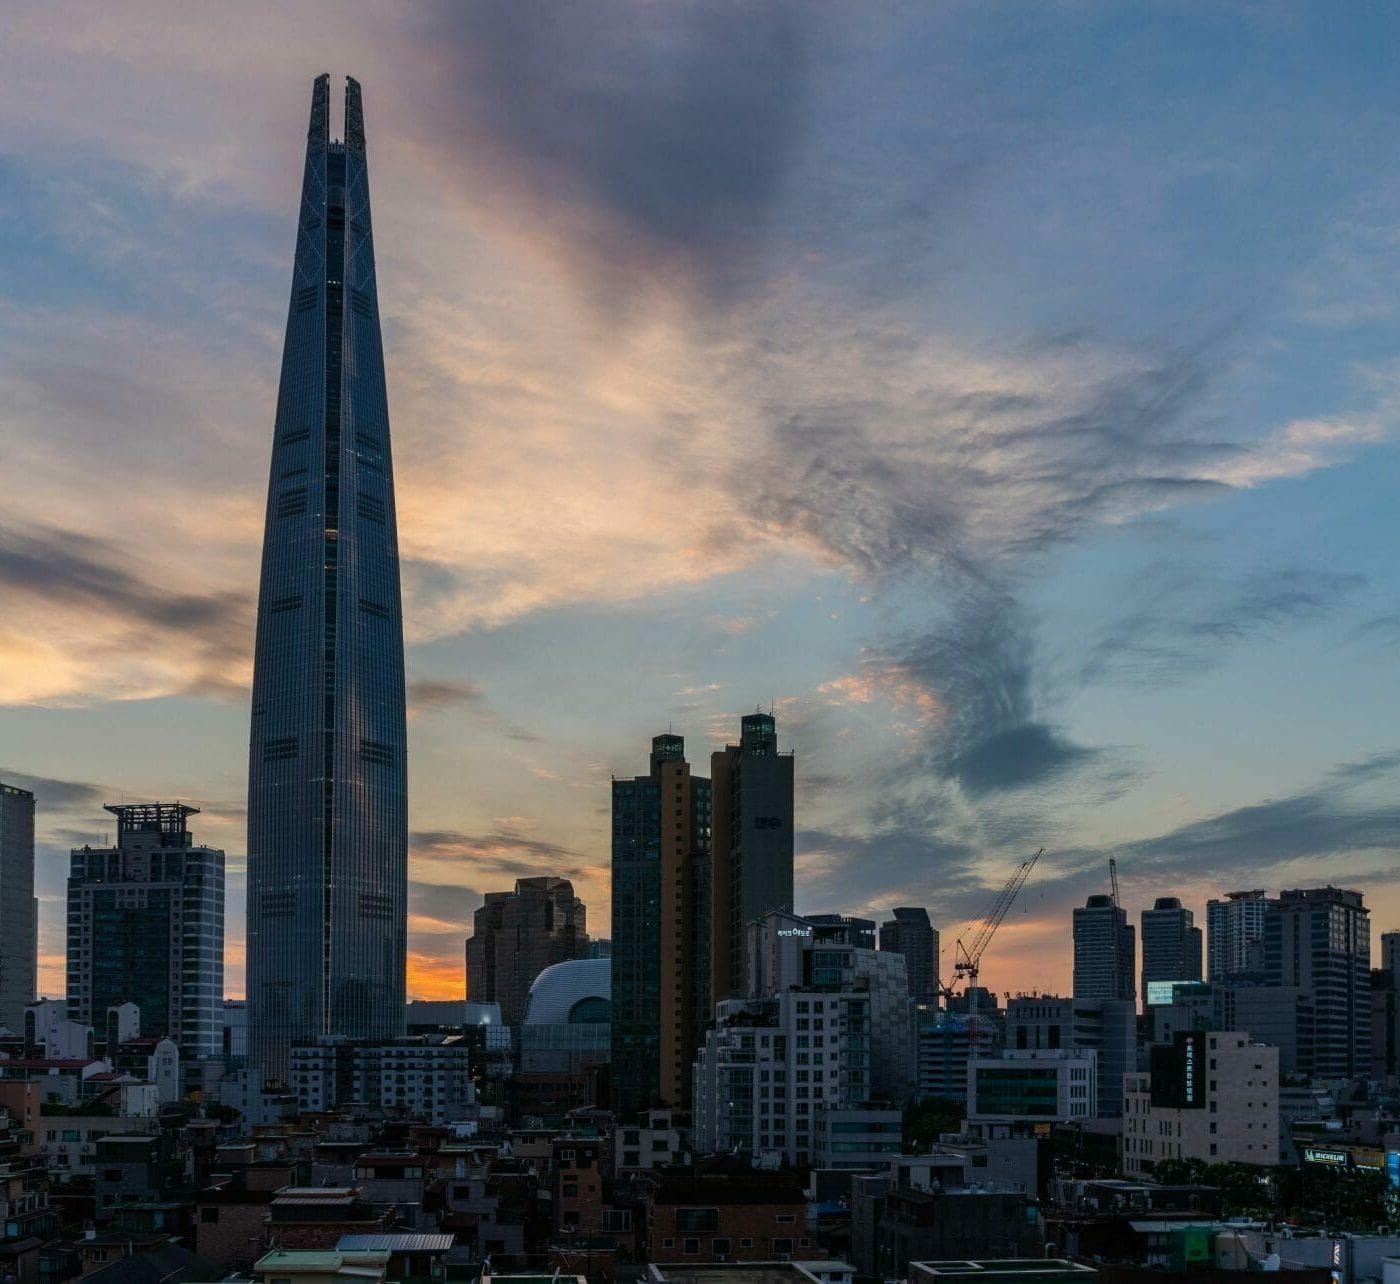 Lotte Tower from Seoulism